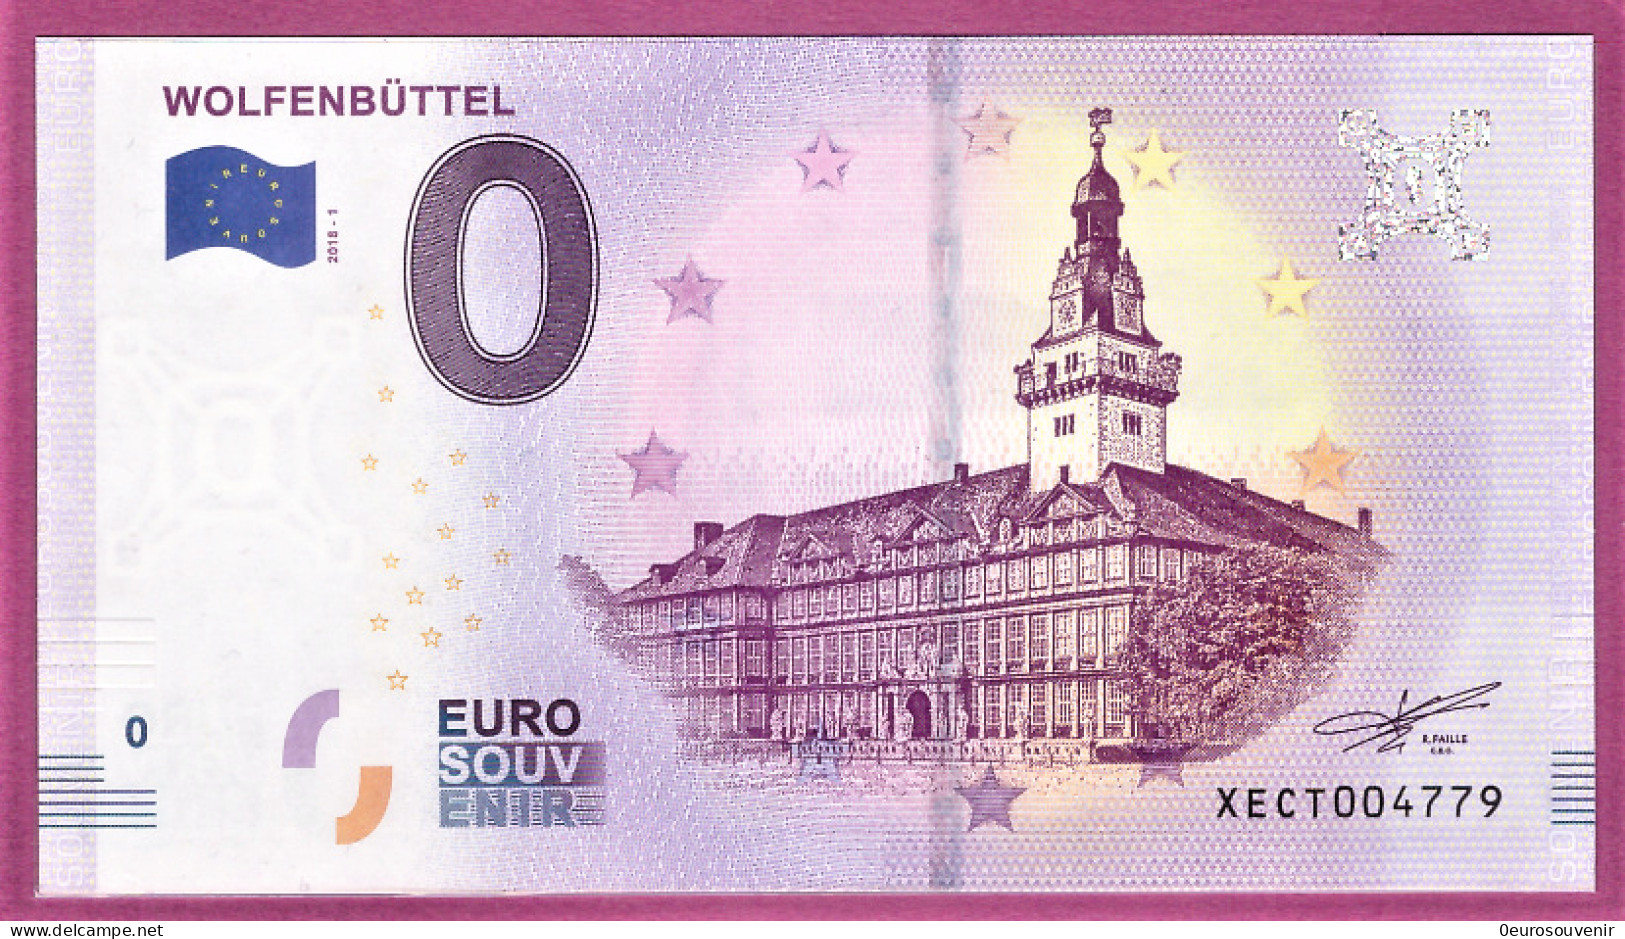 0-Euro XECT 2018-1 WOLFENBÜTTEL - Private Proofs / Unofficial